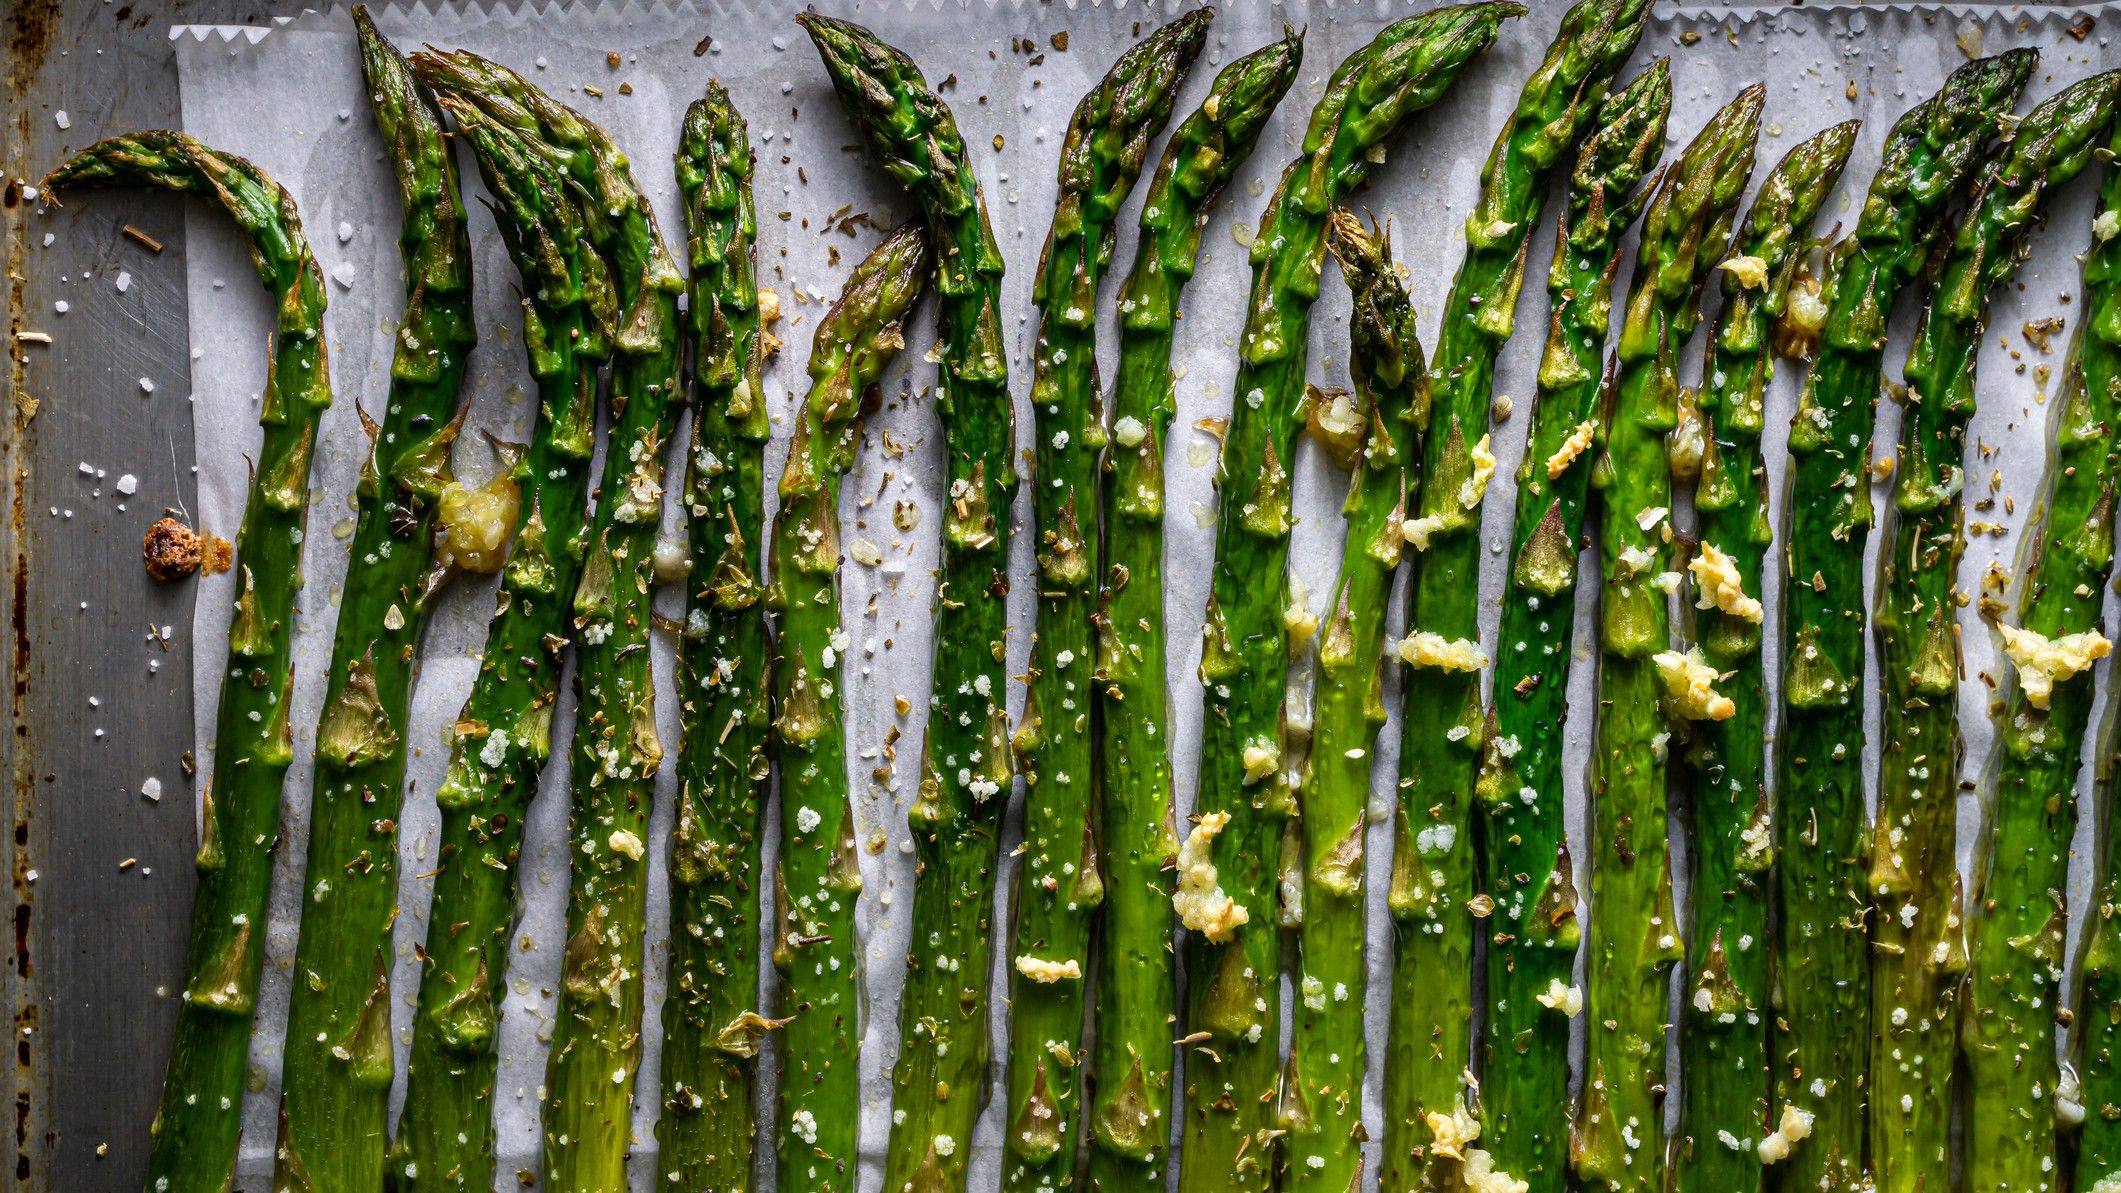 Asparagus can be eaten either cooked or raw. (Getty)